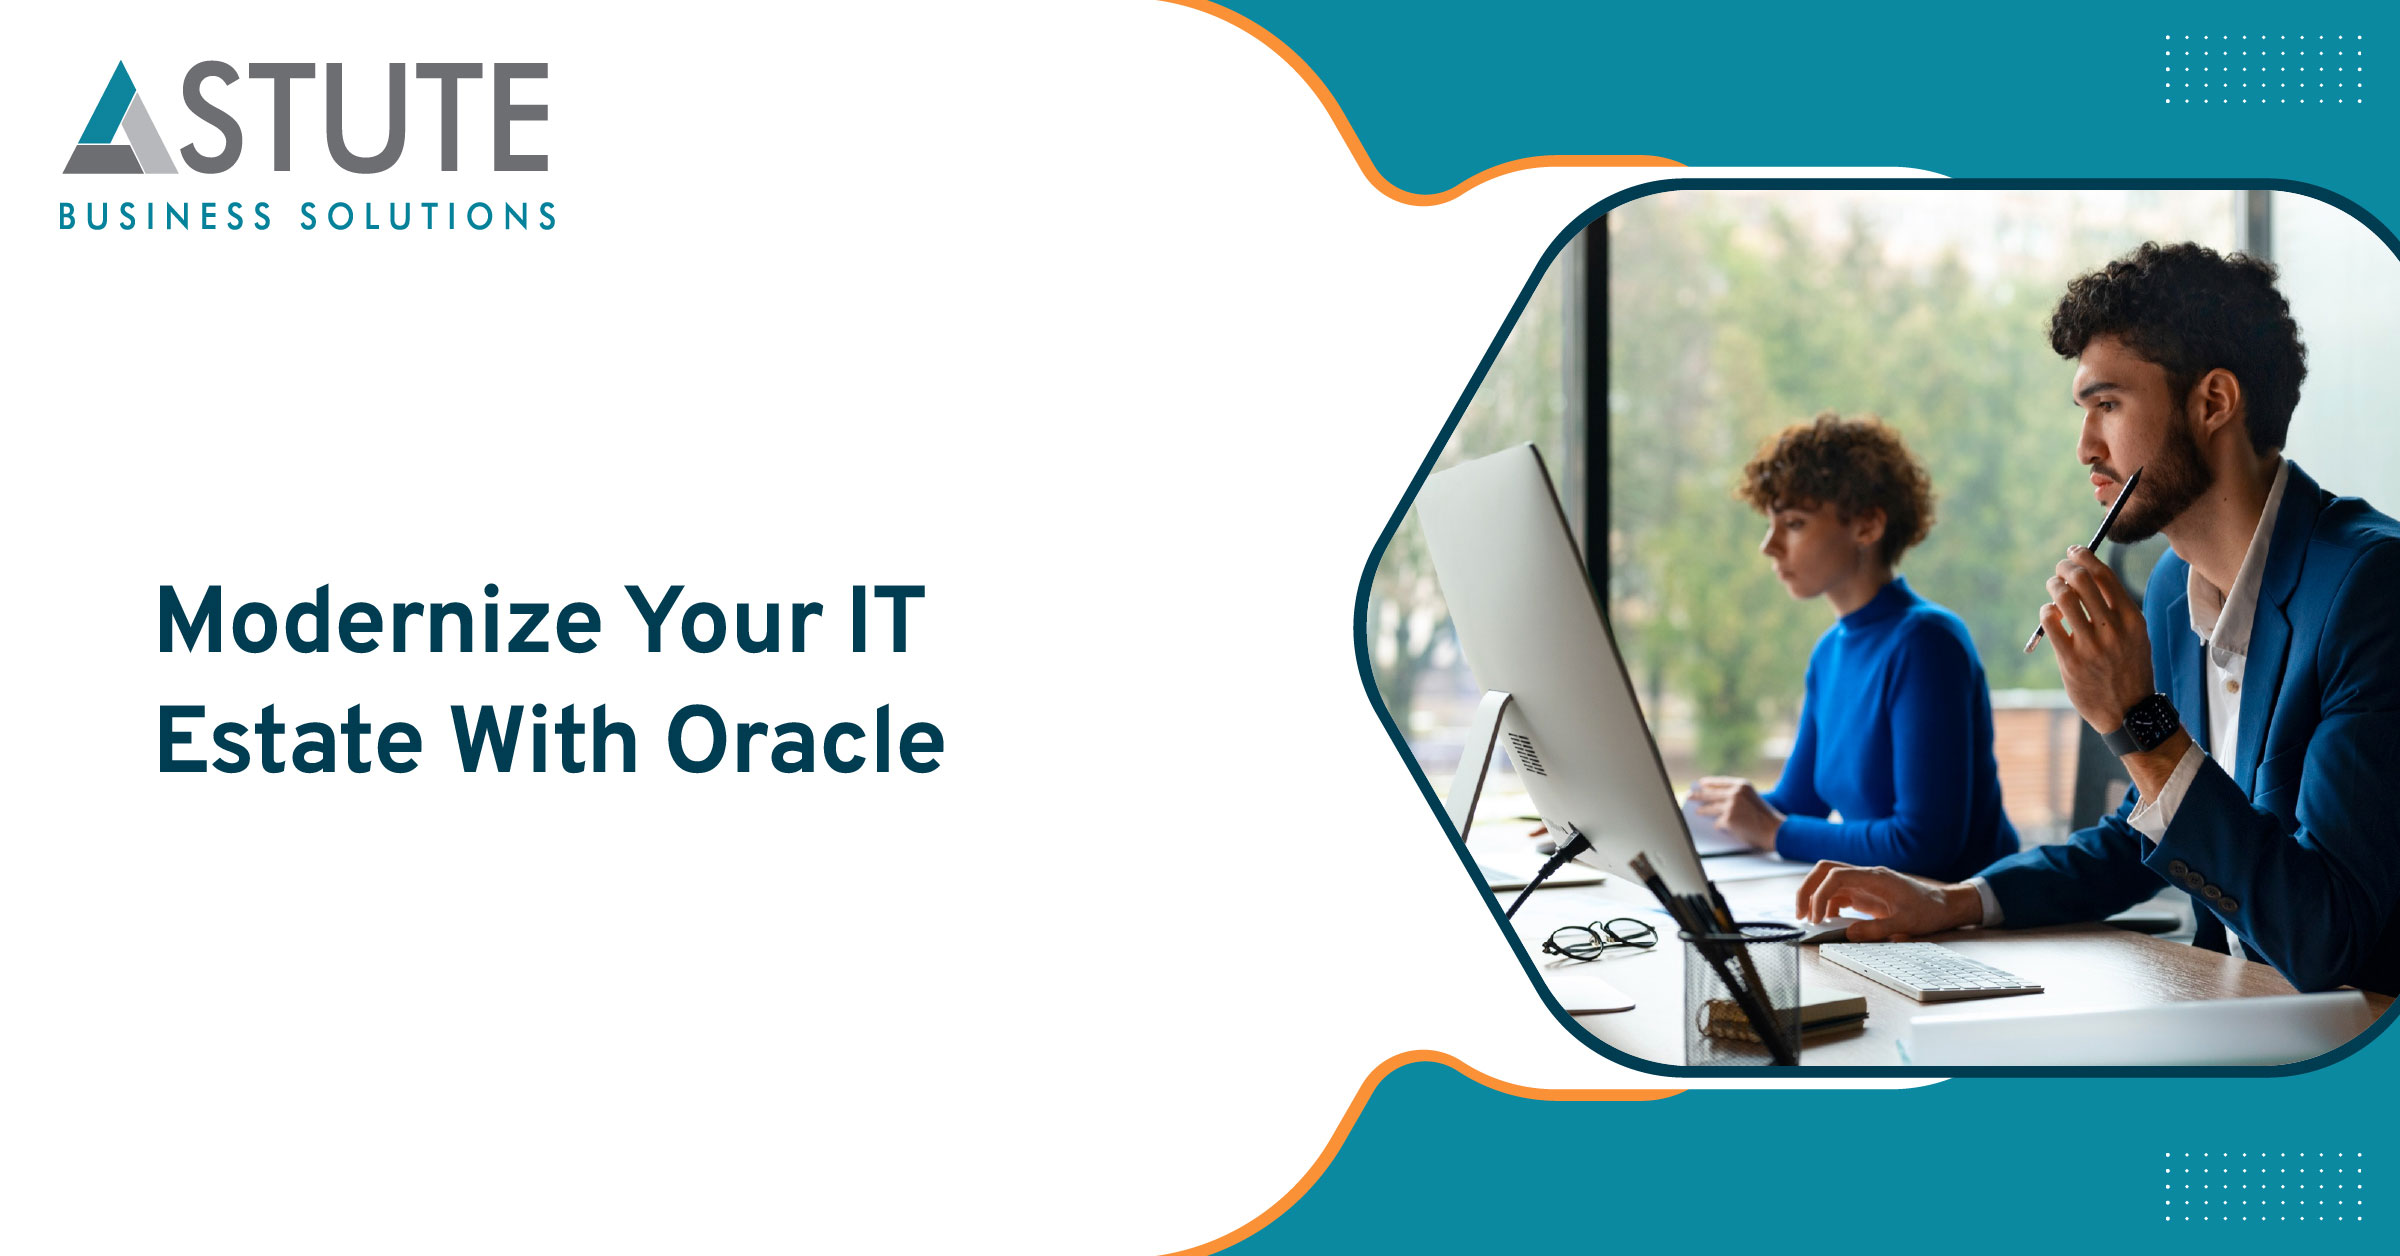 Modernize Your IT Estate With Oracle